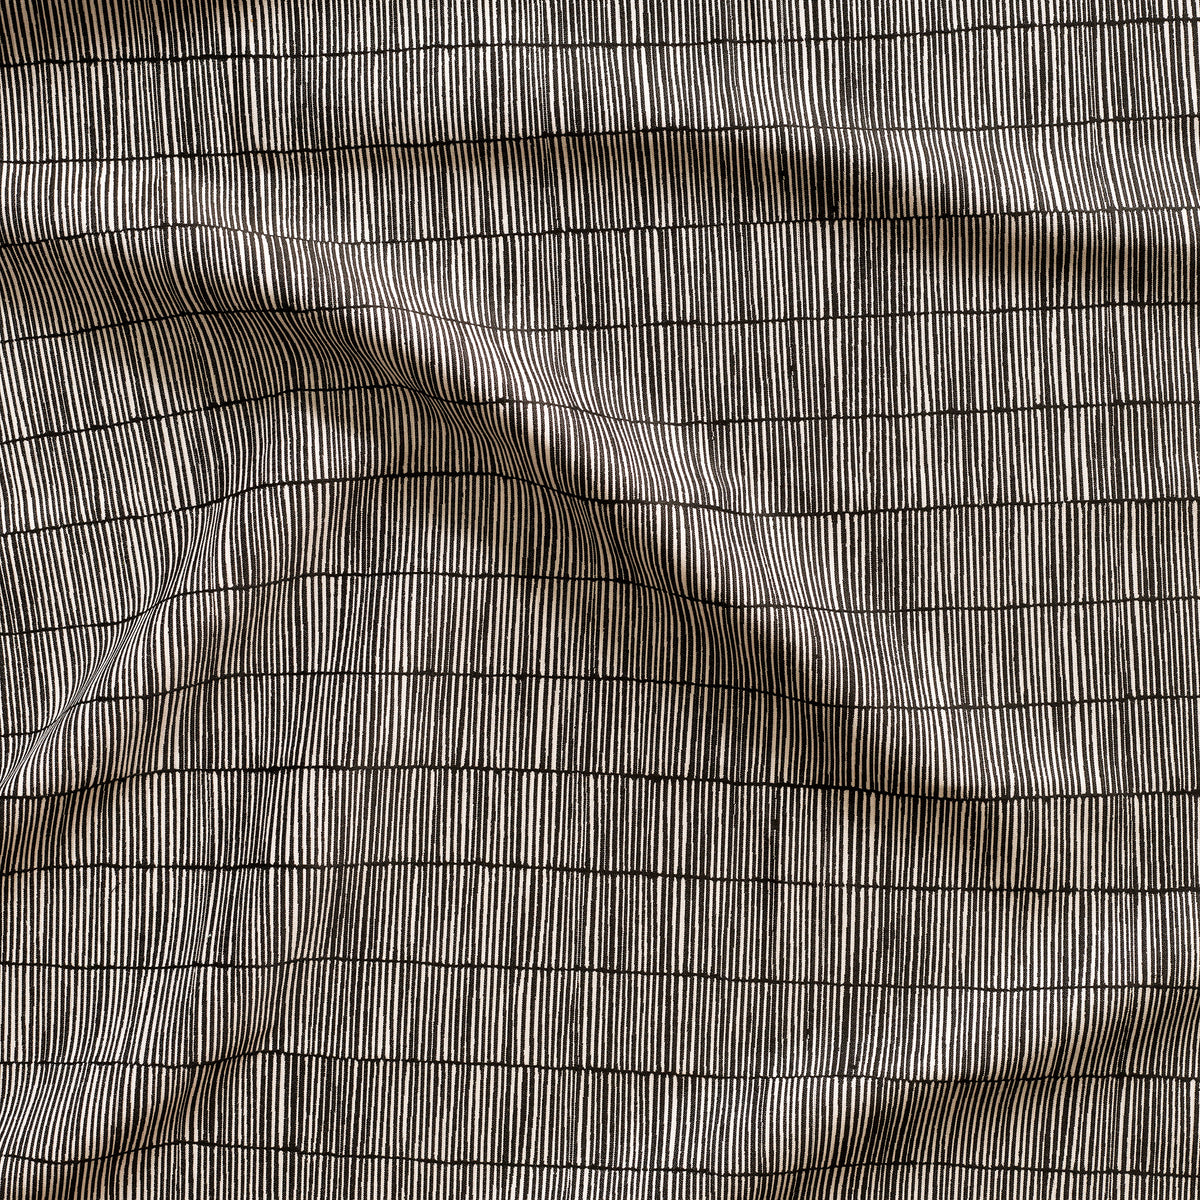 Mood Exclusive Crusoe's Cabana Cotton and Viscose Striped